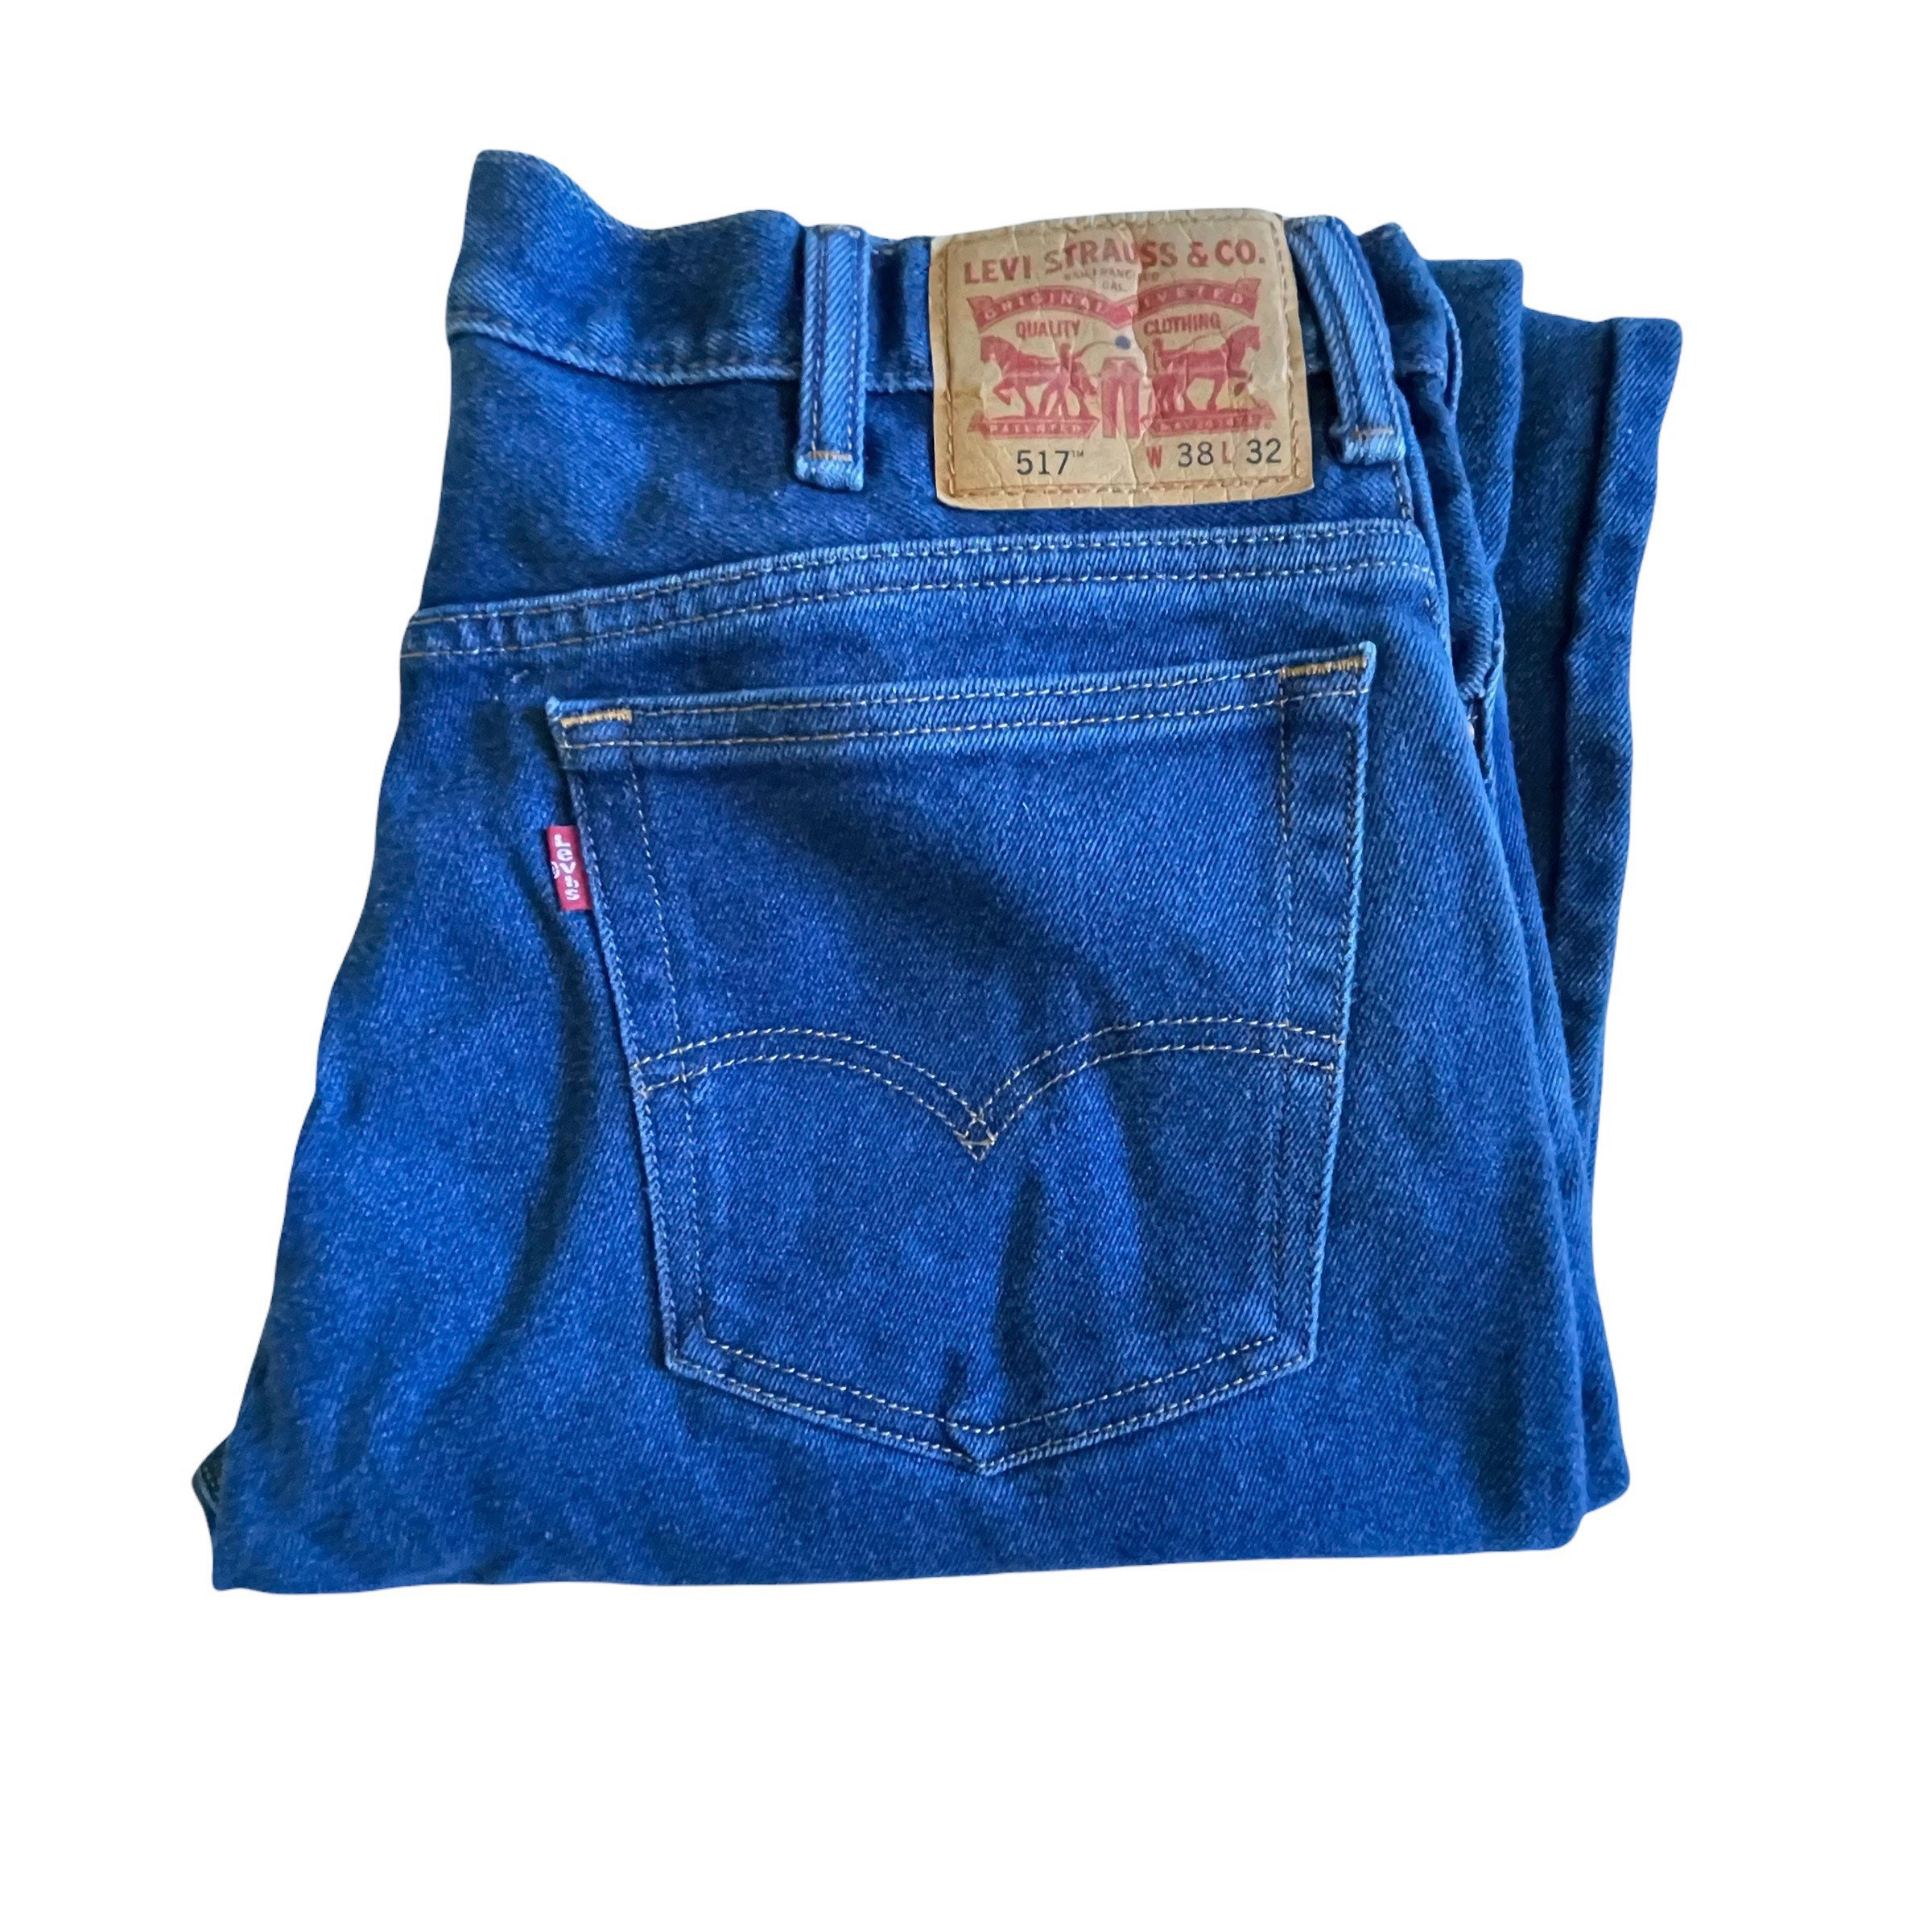 Vintage Levis 517 Jeans Made in USA Size 38/32 - Etsy